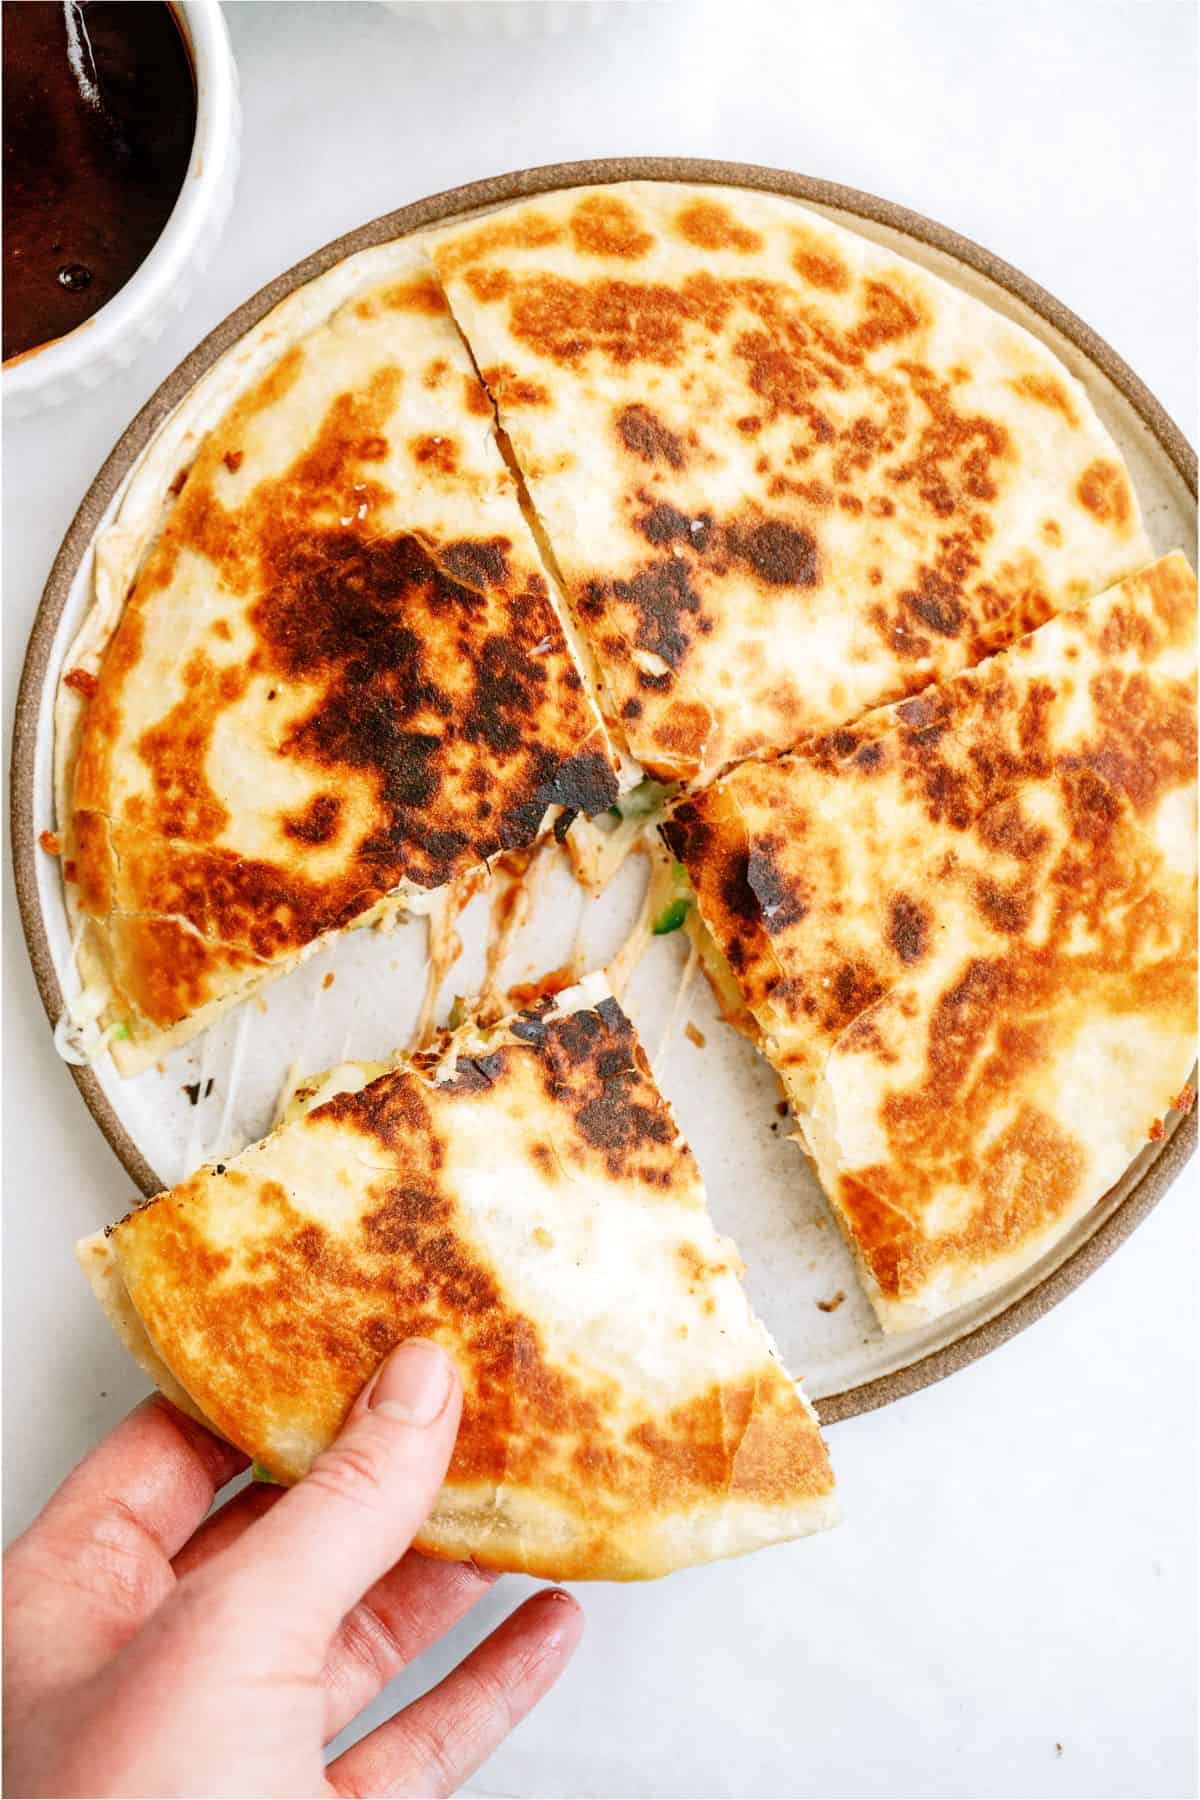 Top view of a BBQ Chicken and Pineapple Quesadillas on a plate, with one person removing a section